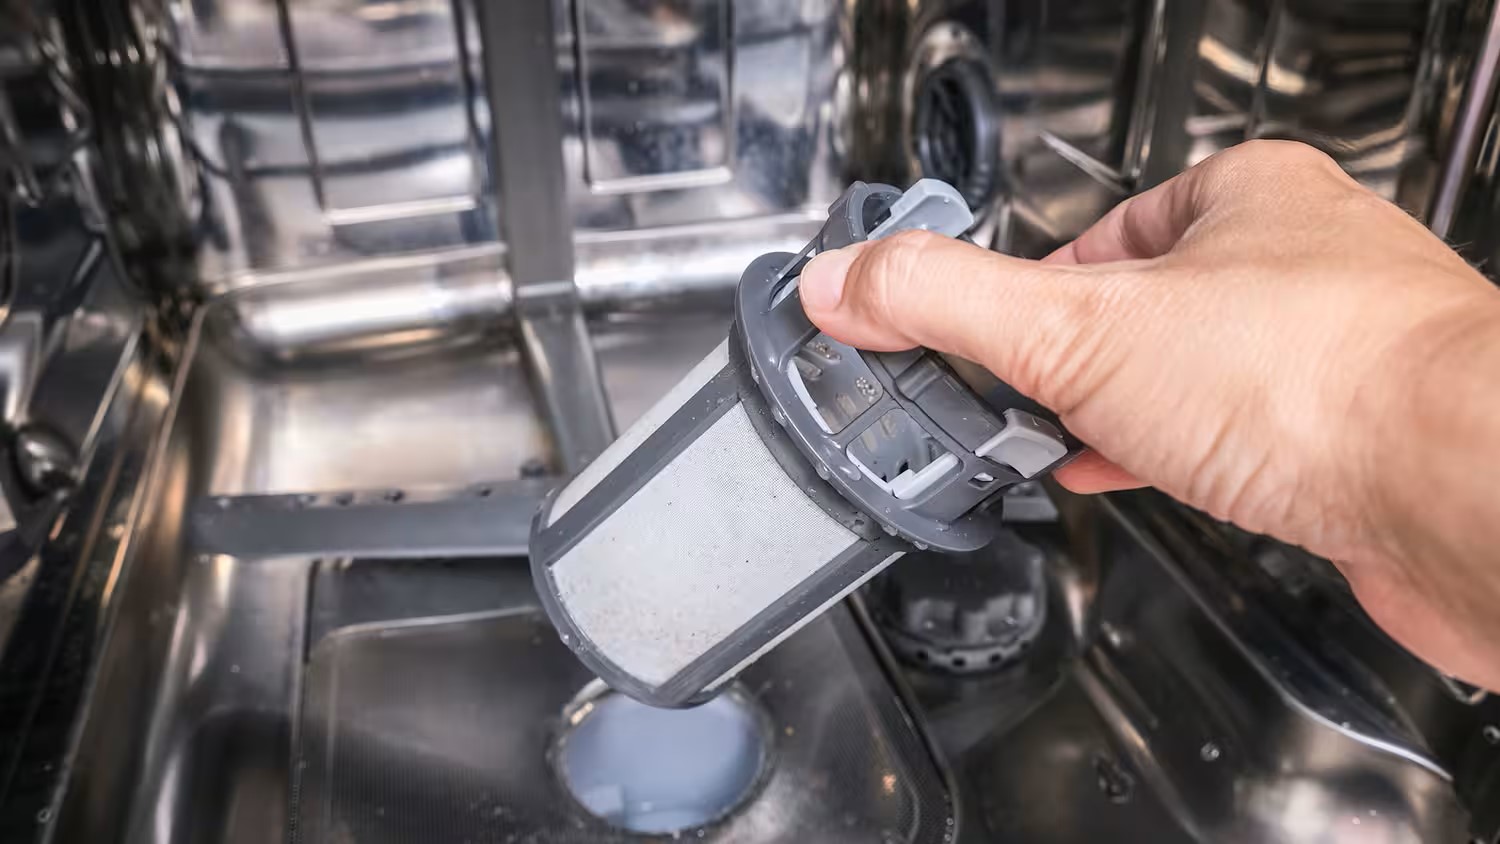 How To Drain Dishwasher Manually